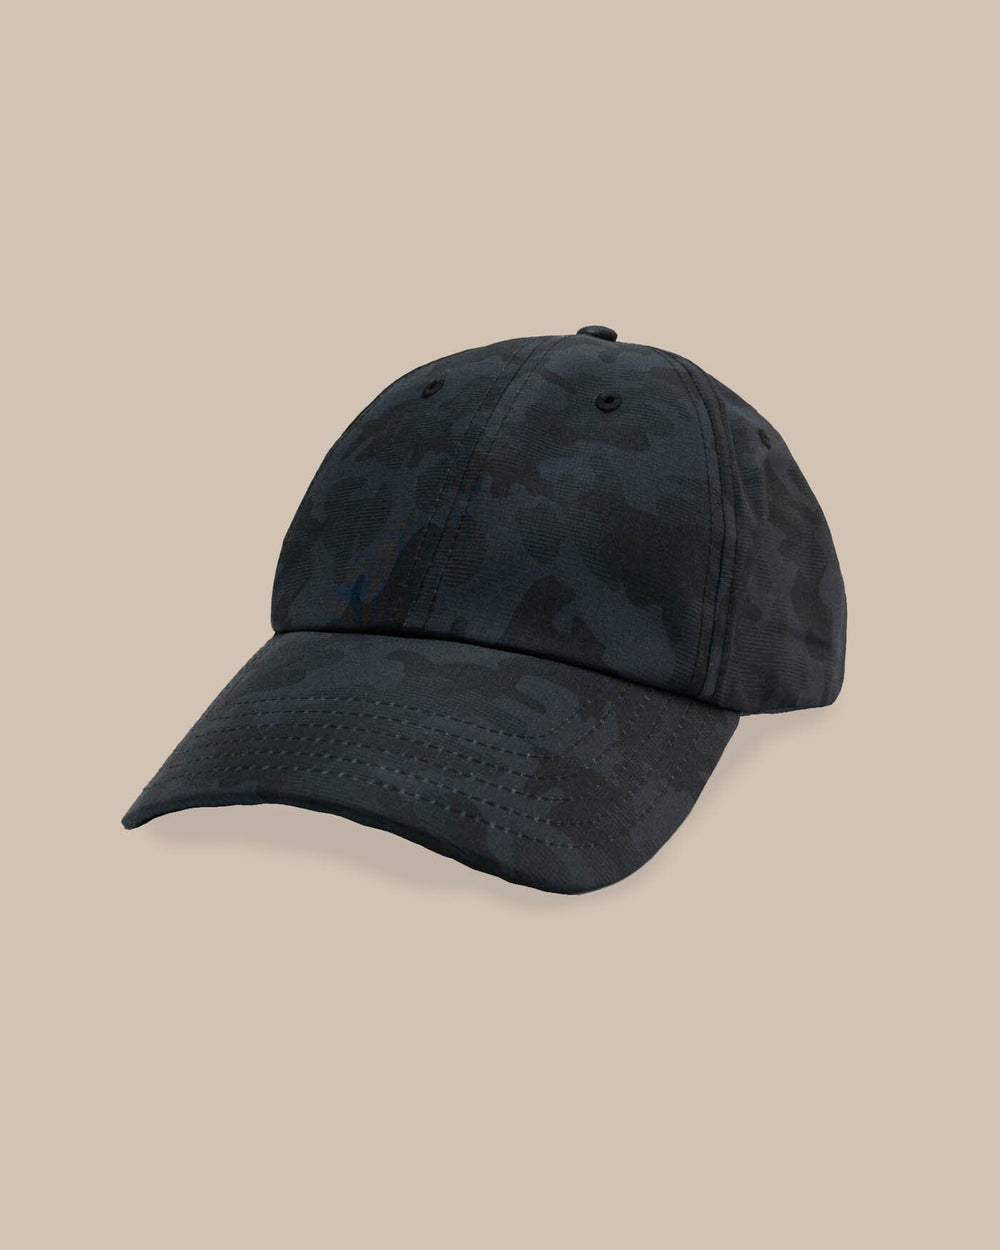 The front view of the Southern Tide Camo Printed Performance Hat by Southern Tide - Caviar Black